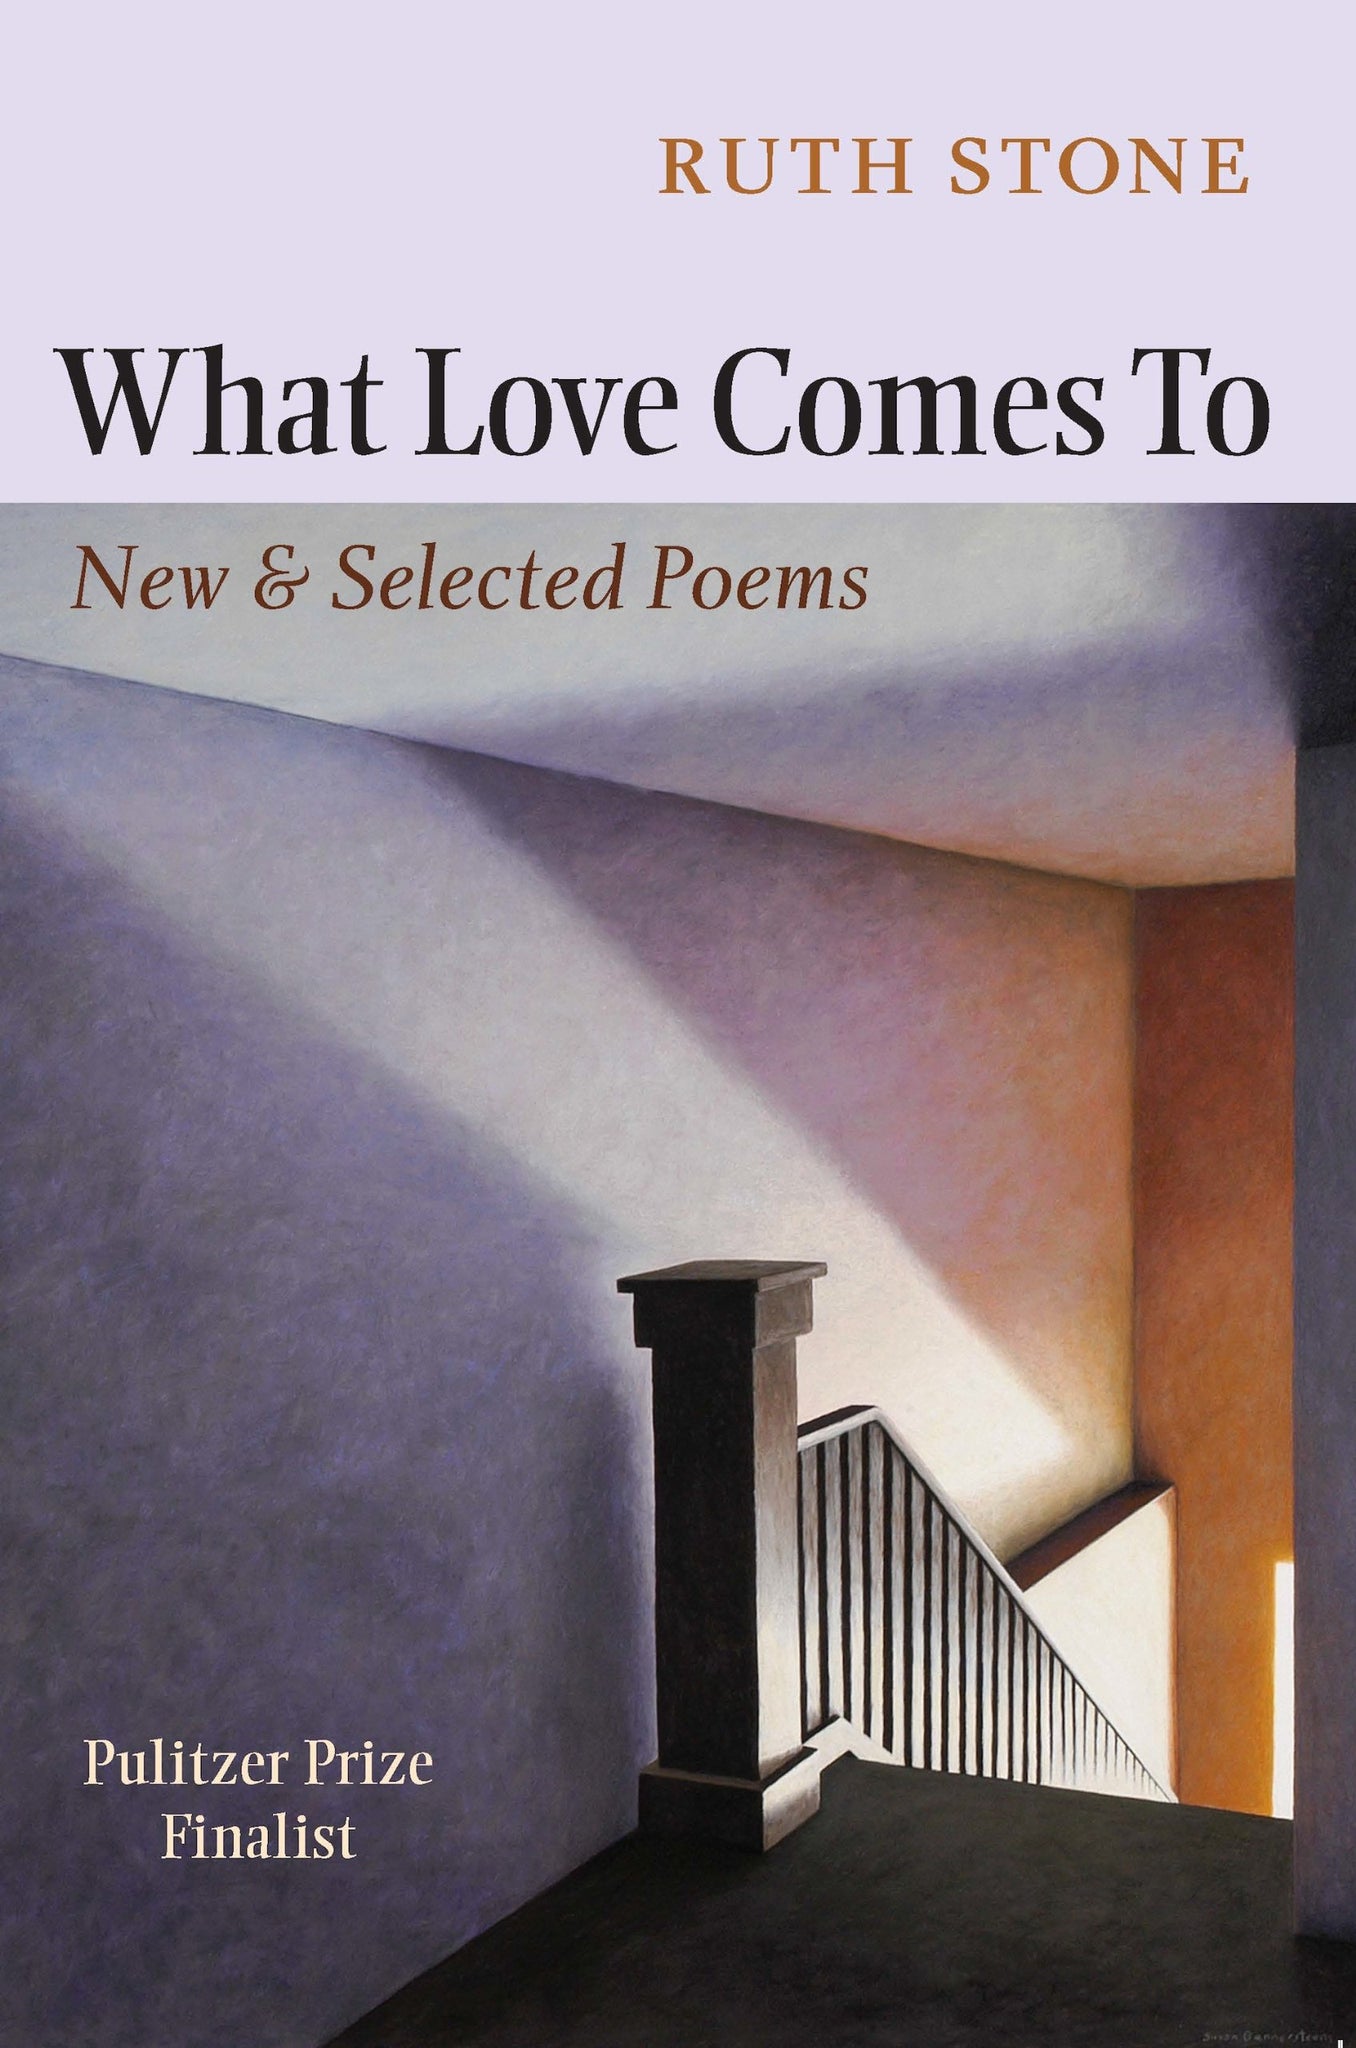 What Love Comes To: New & Selected Poems by Ruth Stone